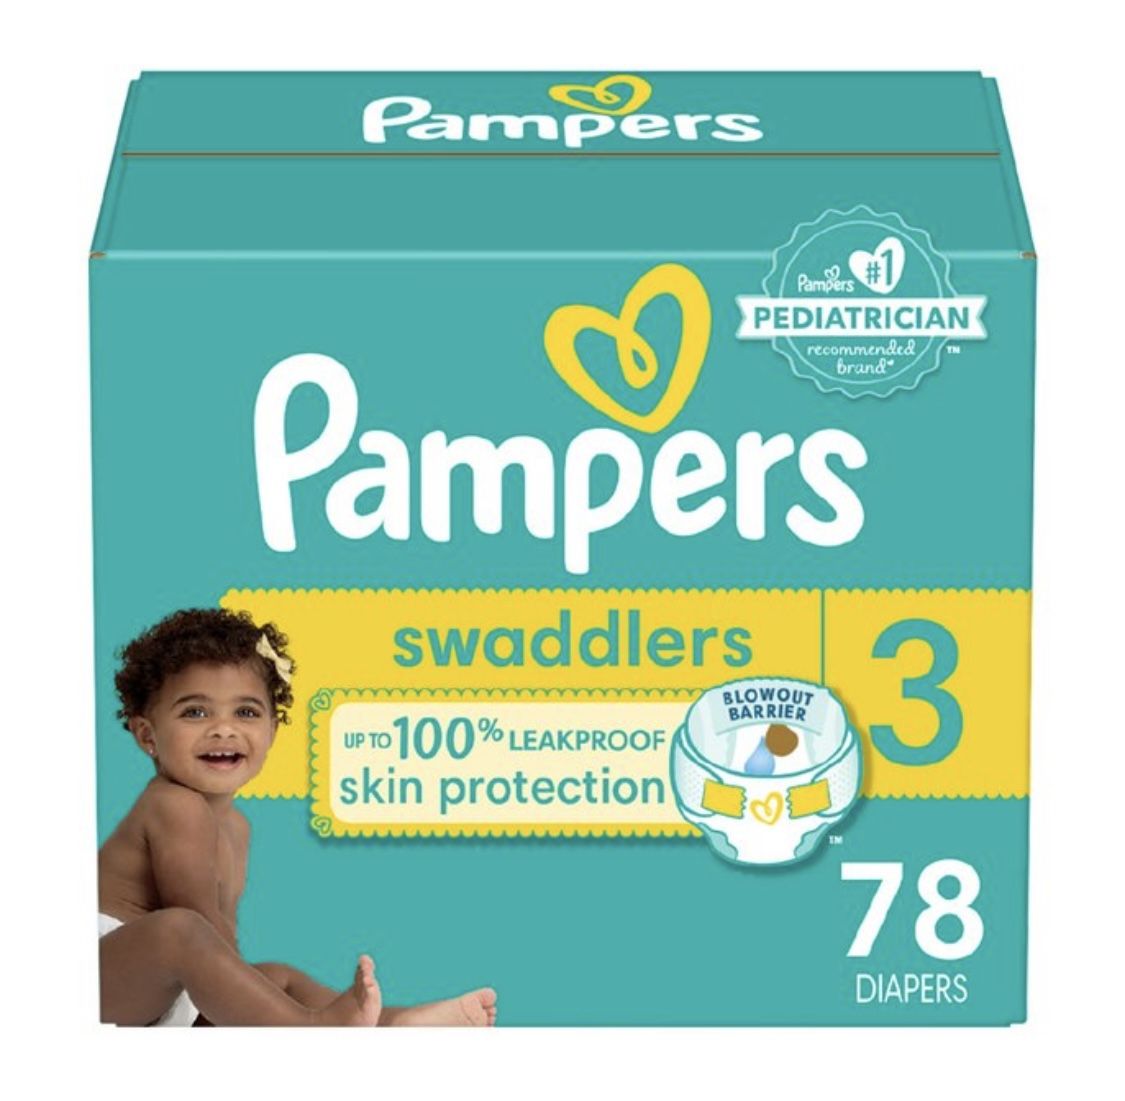 New 1 Box of Pampers Swaddlers Size 3 (78 diapers per box)